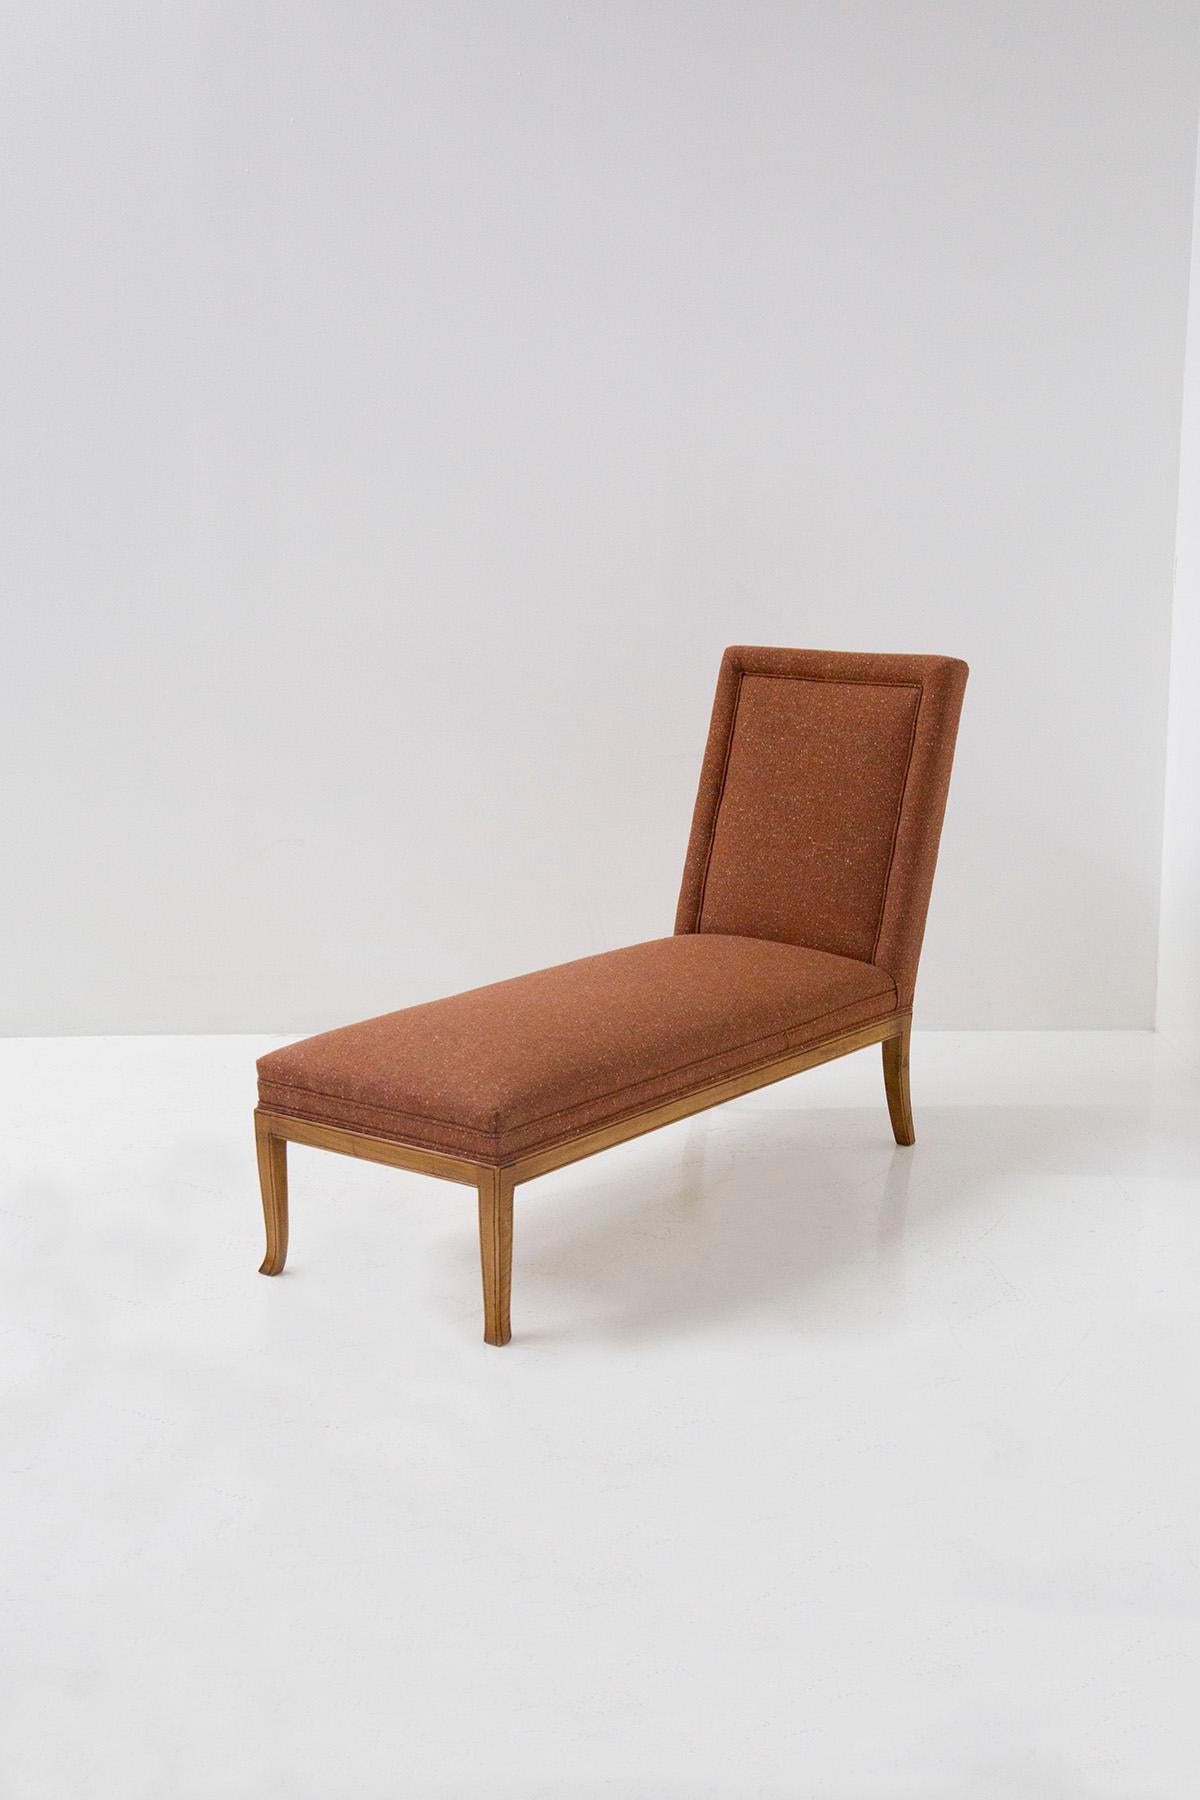 Elegant chaise lounge from the 1960s by the great American designer T.H. Robsjohn-Gibbings . The chaise lounge is the perfect piece of furniture in the Classic American style, where elegance and comfort are the masters. The chaise lounge is restored